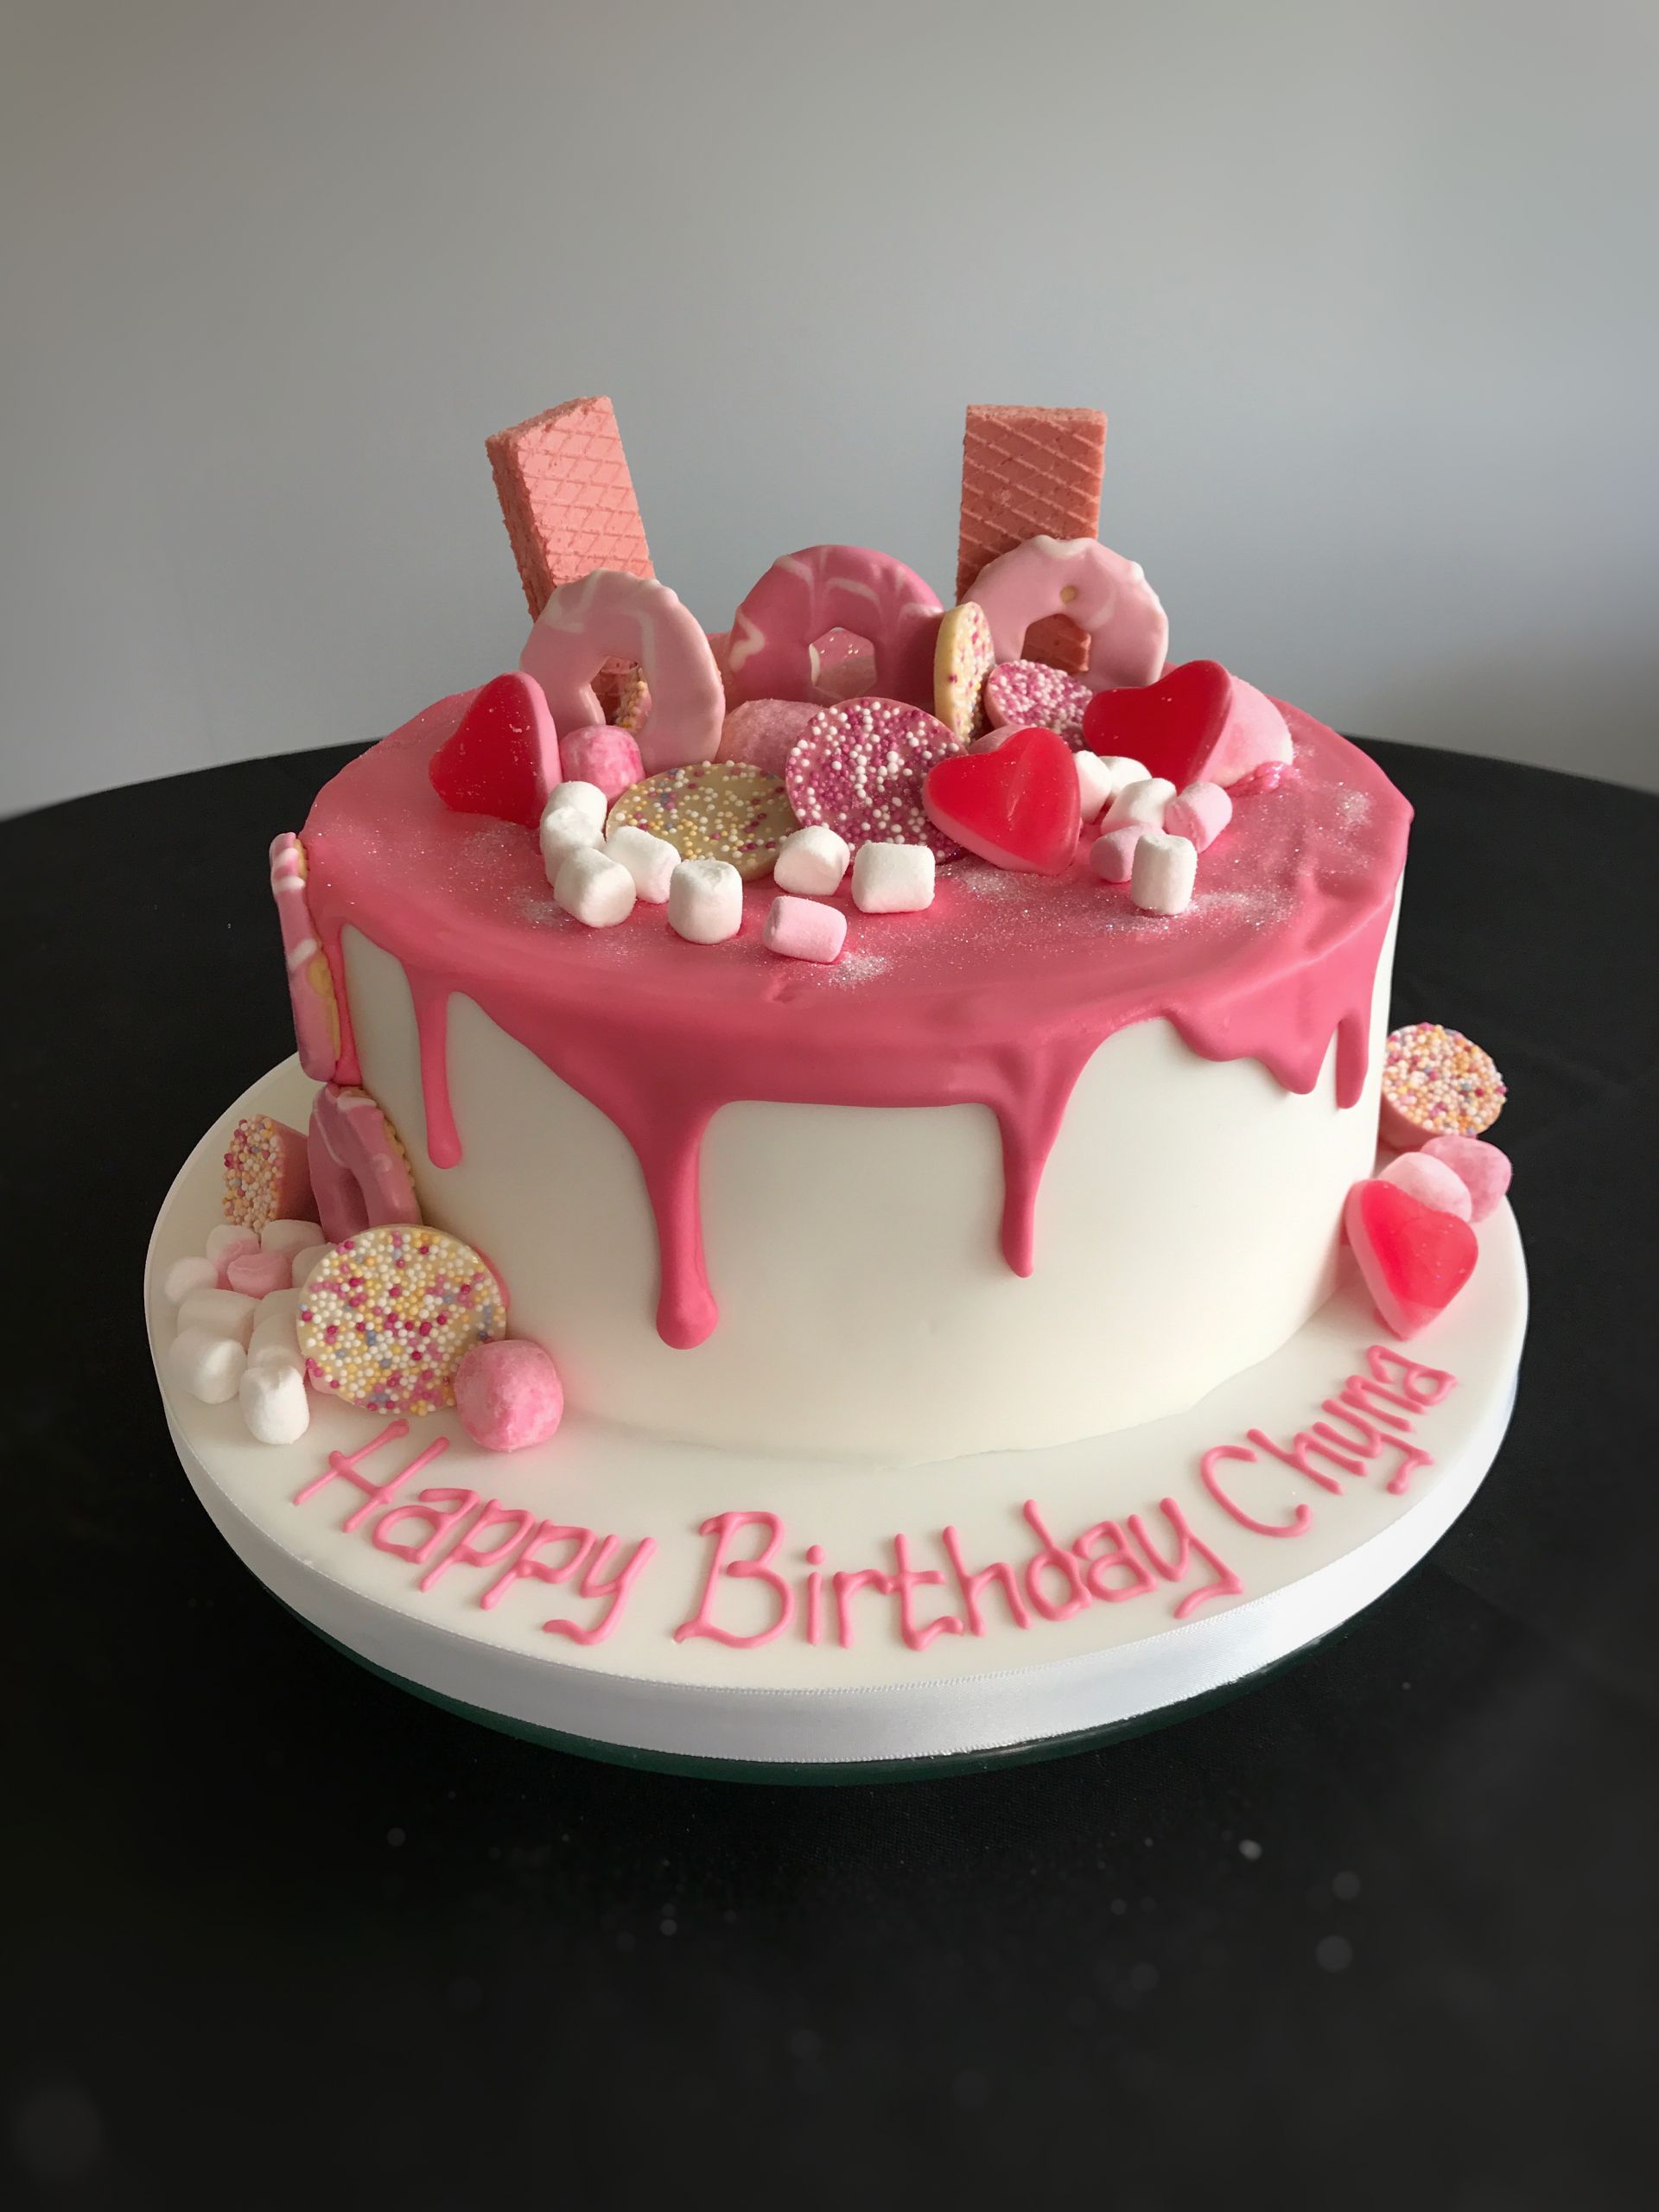 A Picture Of A Birthday Cake
 Female Birthday Cakes Bedfordshire Hertfordshire London